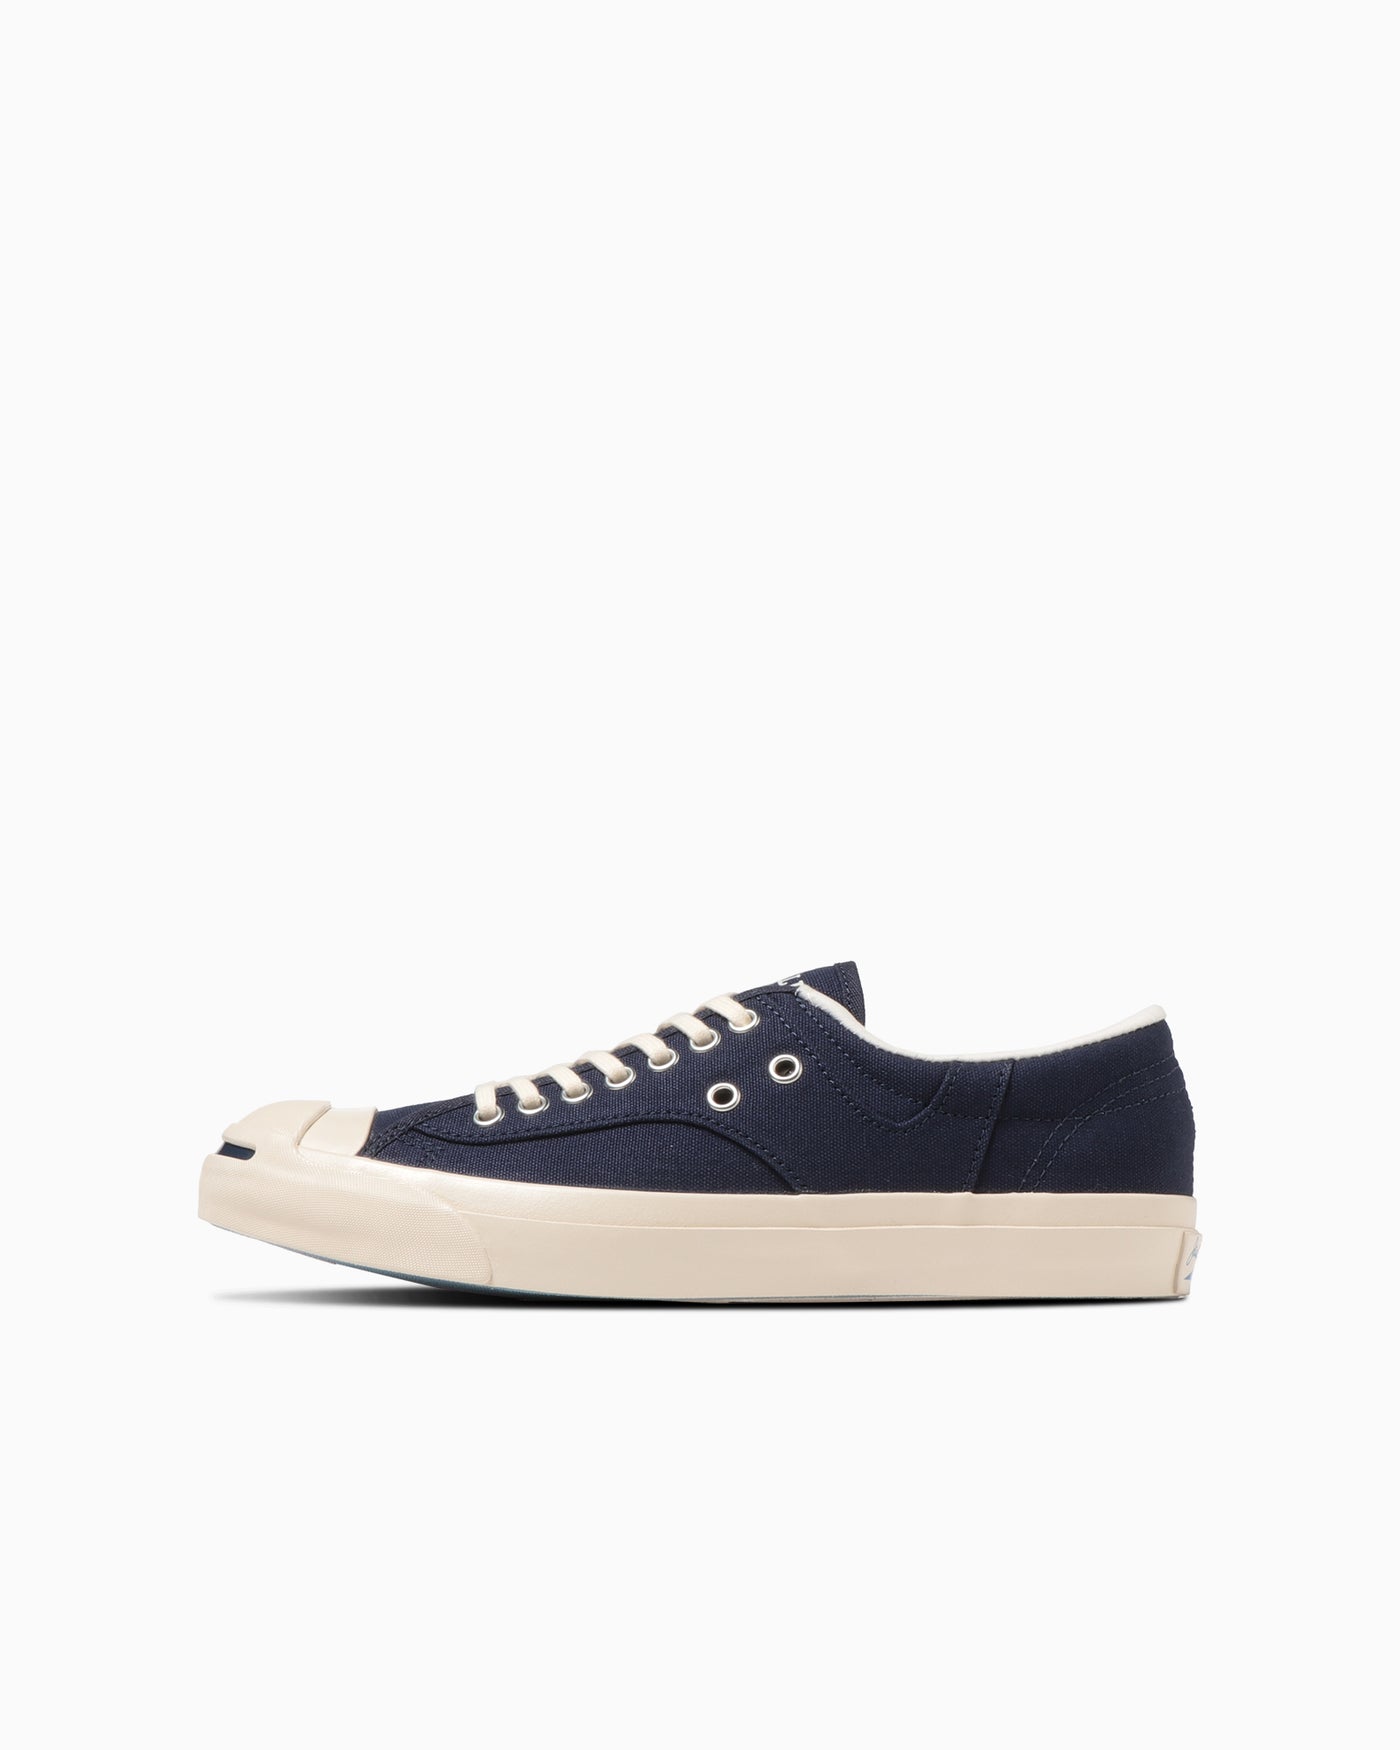 JACK PURCELL US RLY IL